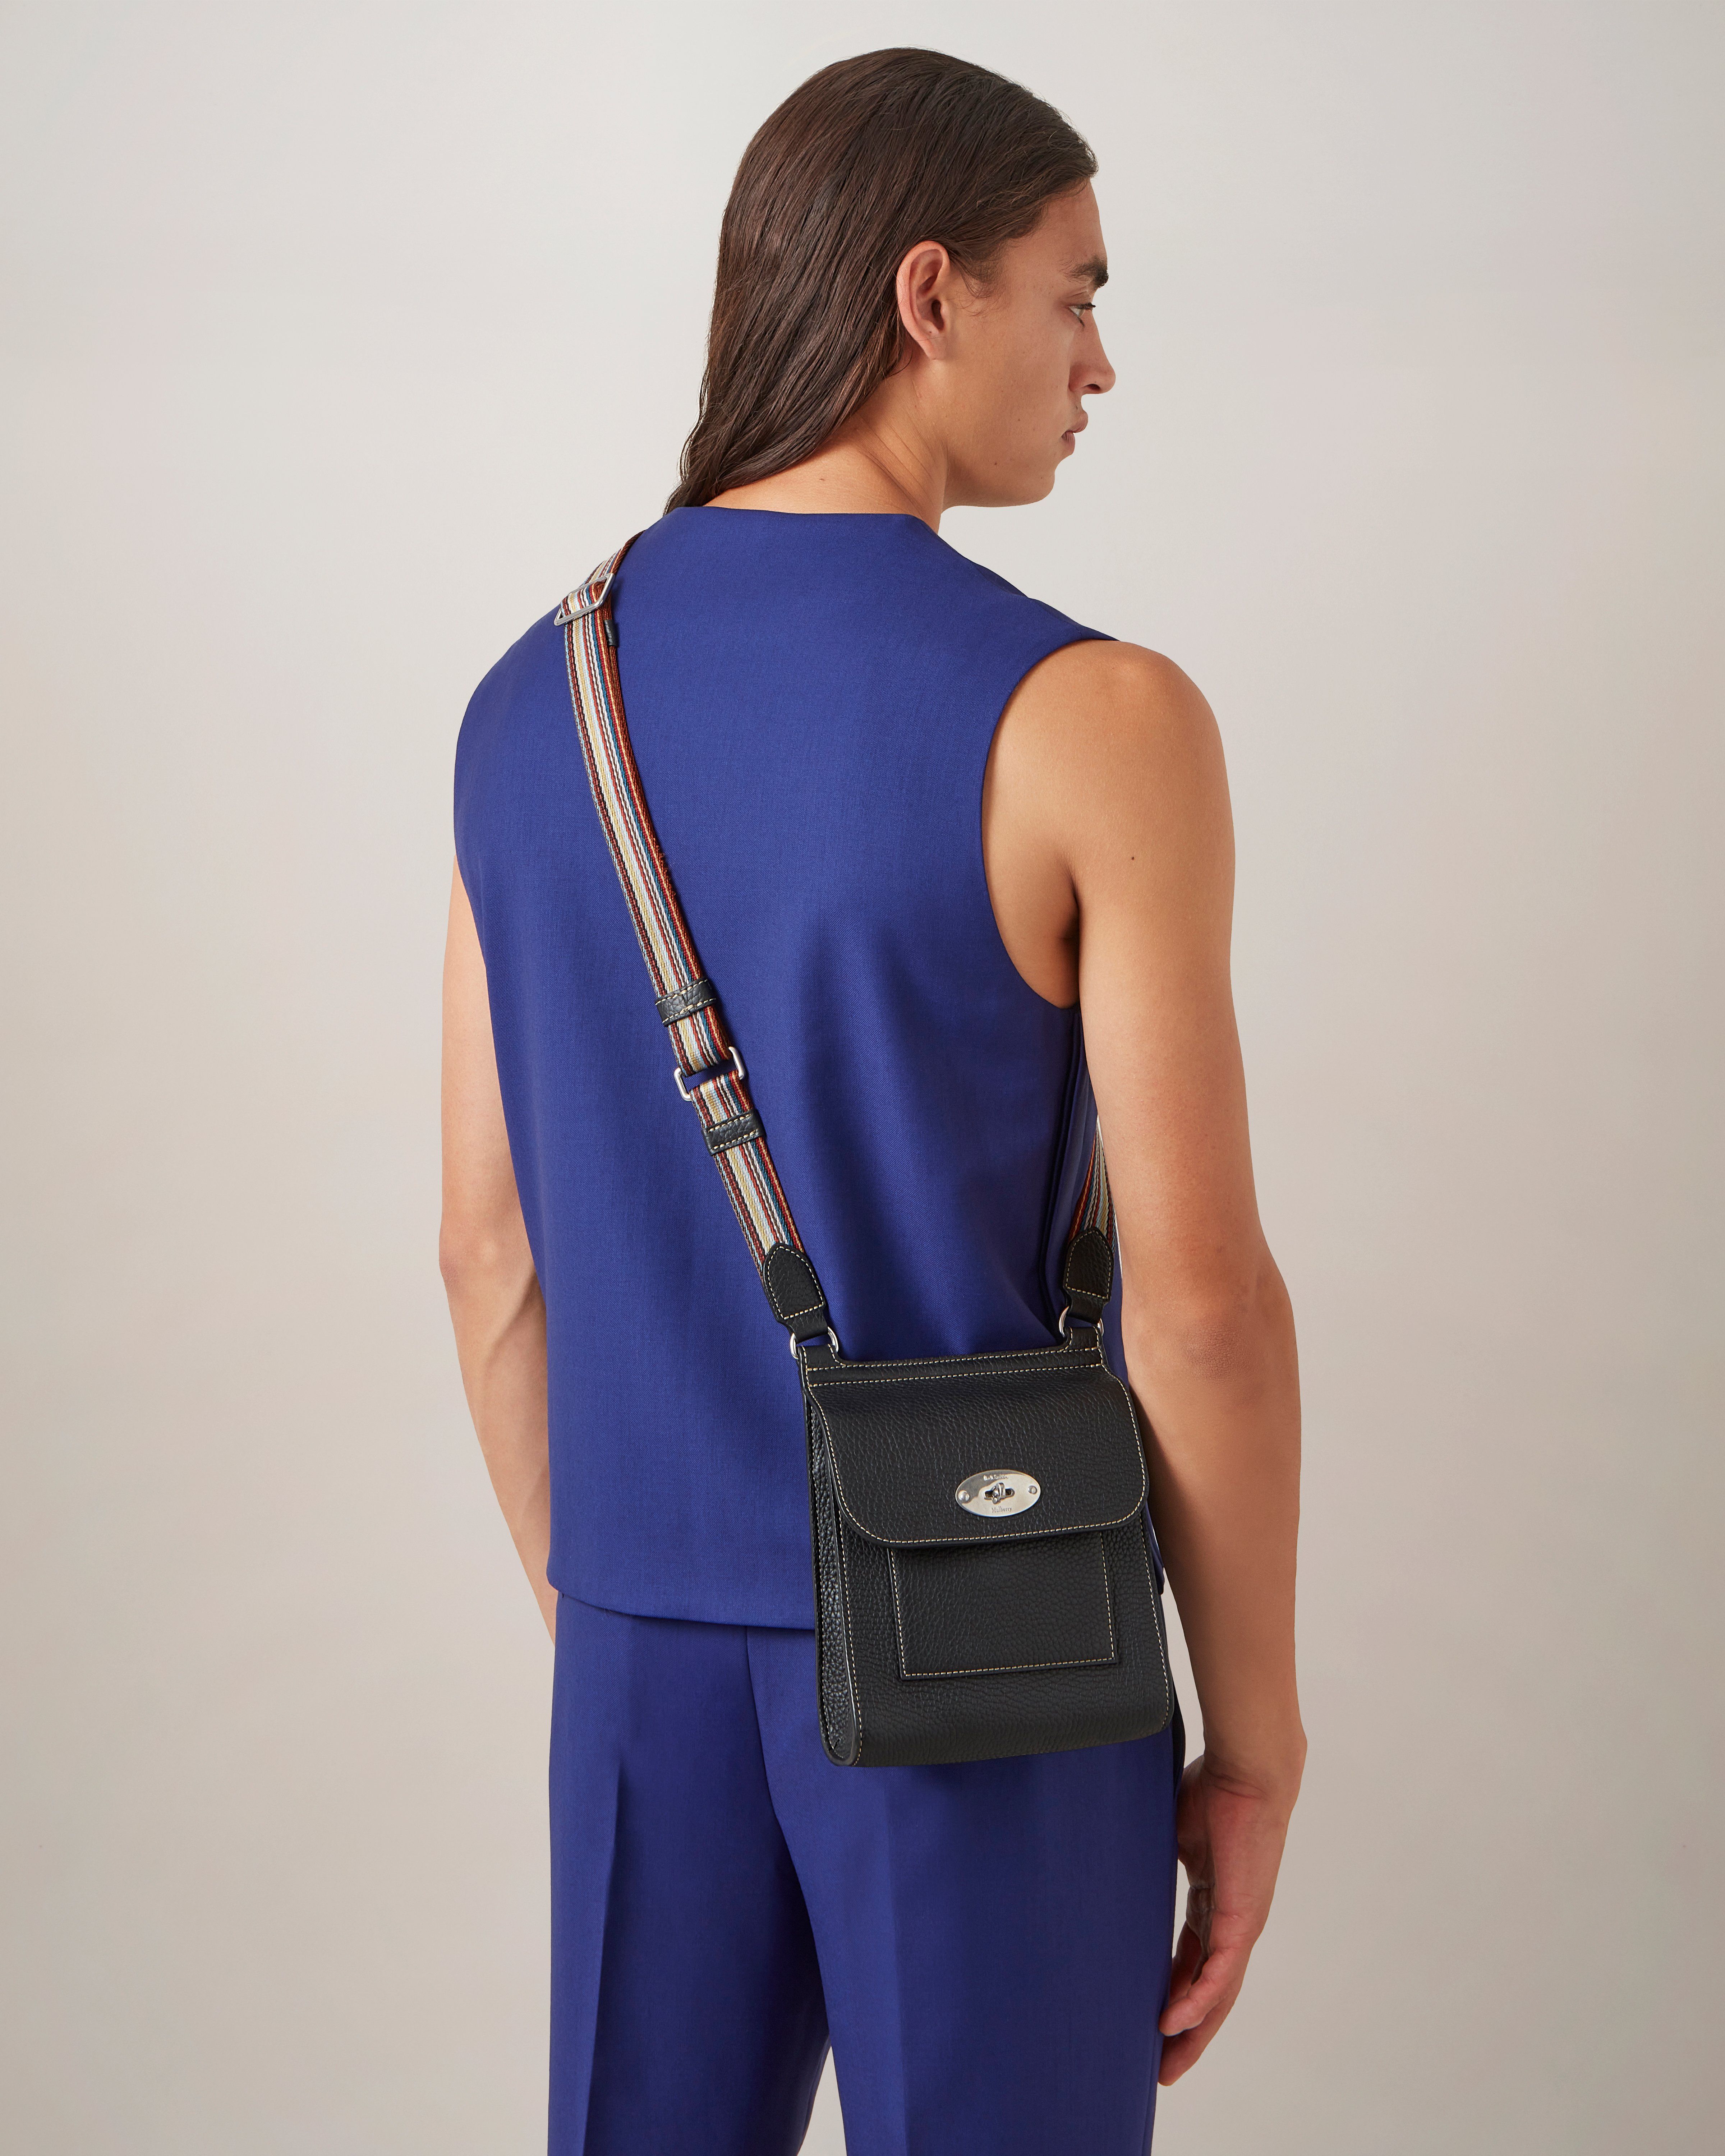 model wearing mulberry paul smith small antony bag in black